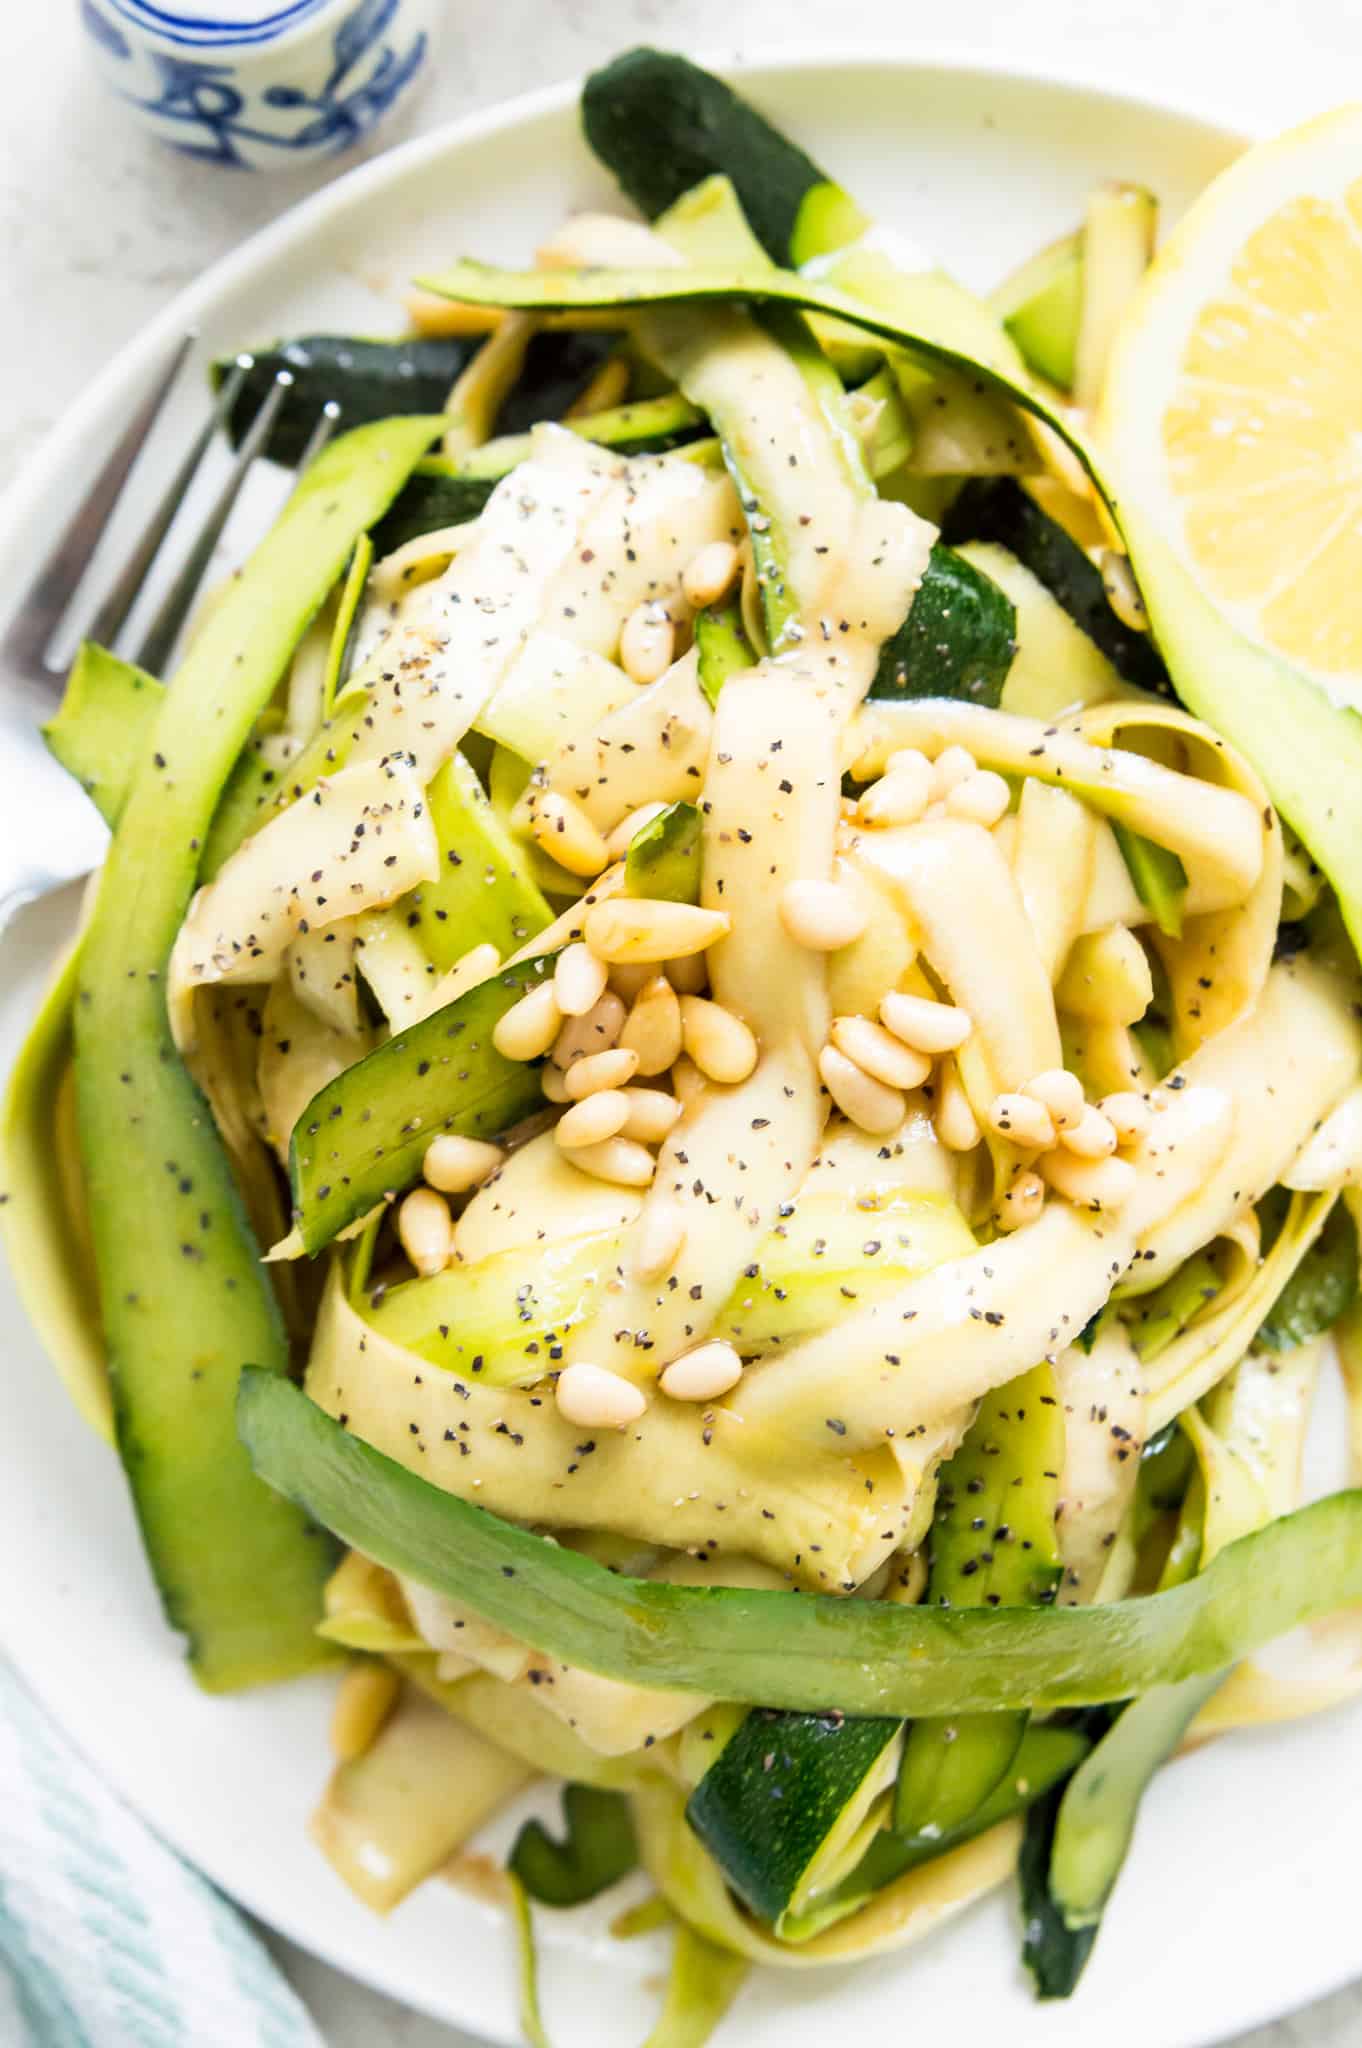 A raw zucchini salad on a plate topped with pine nuts.